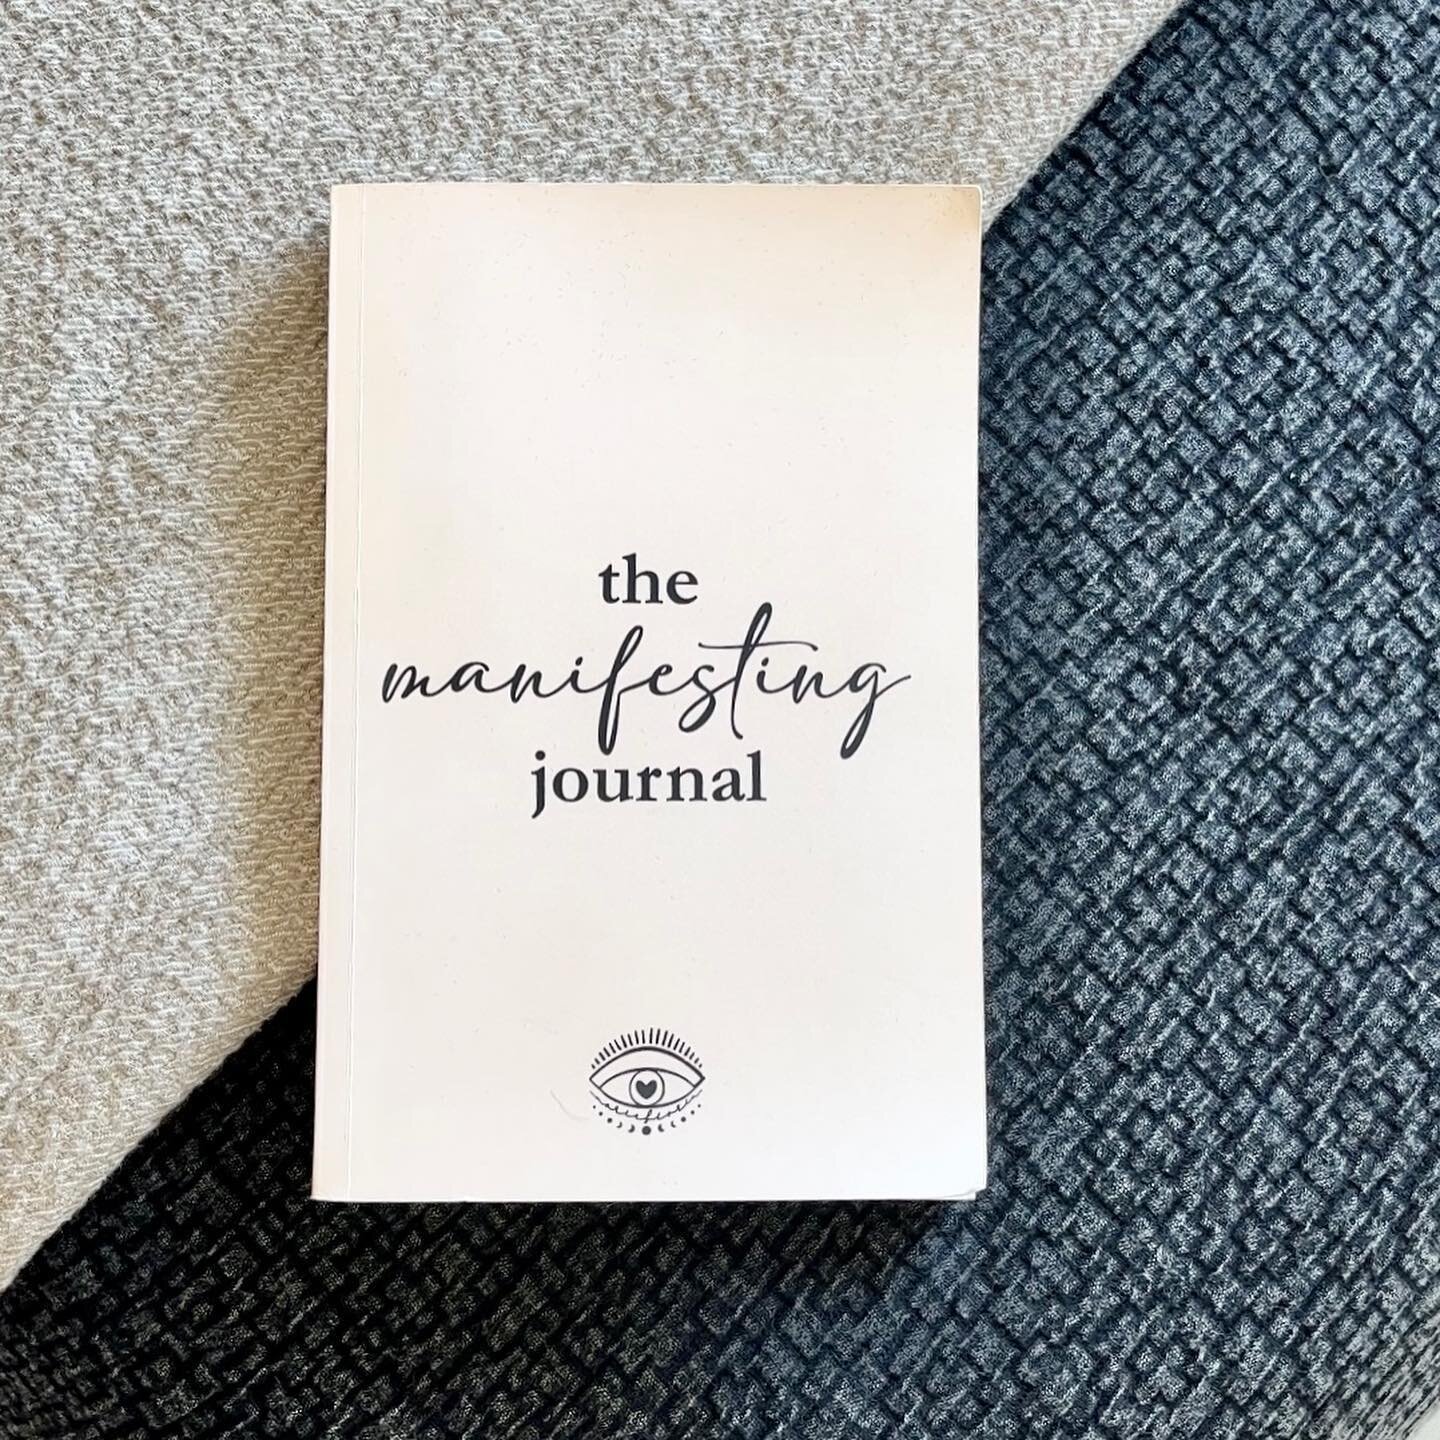 And it&rsquo;s raining in LA! Again! Even when the outside conditions are not the way you want them to be, you still have the power to choose how you want to feel. You&rsquo;re in control, create a life you love 💛✨ #themanifestingjournal #manifestin